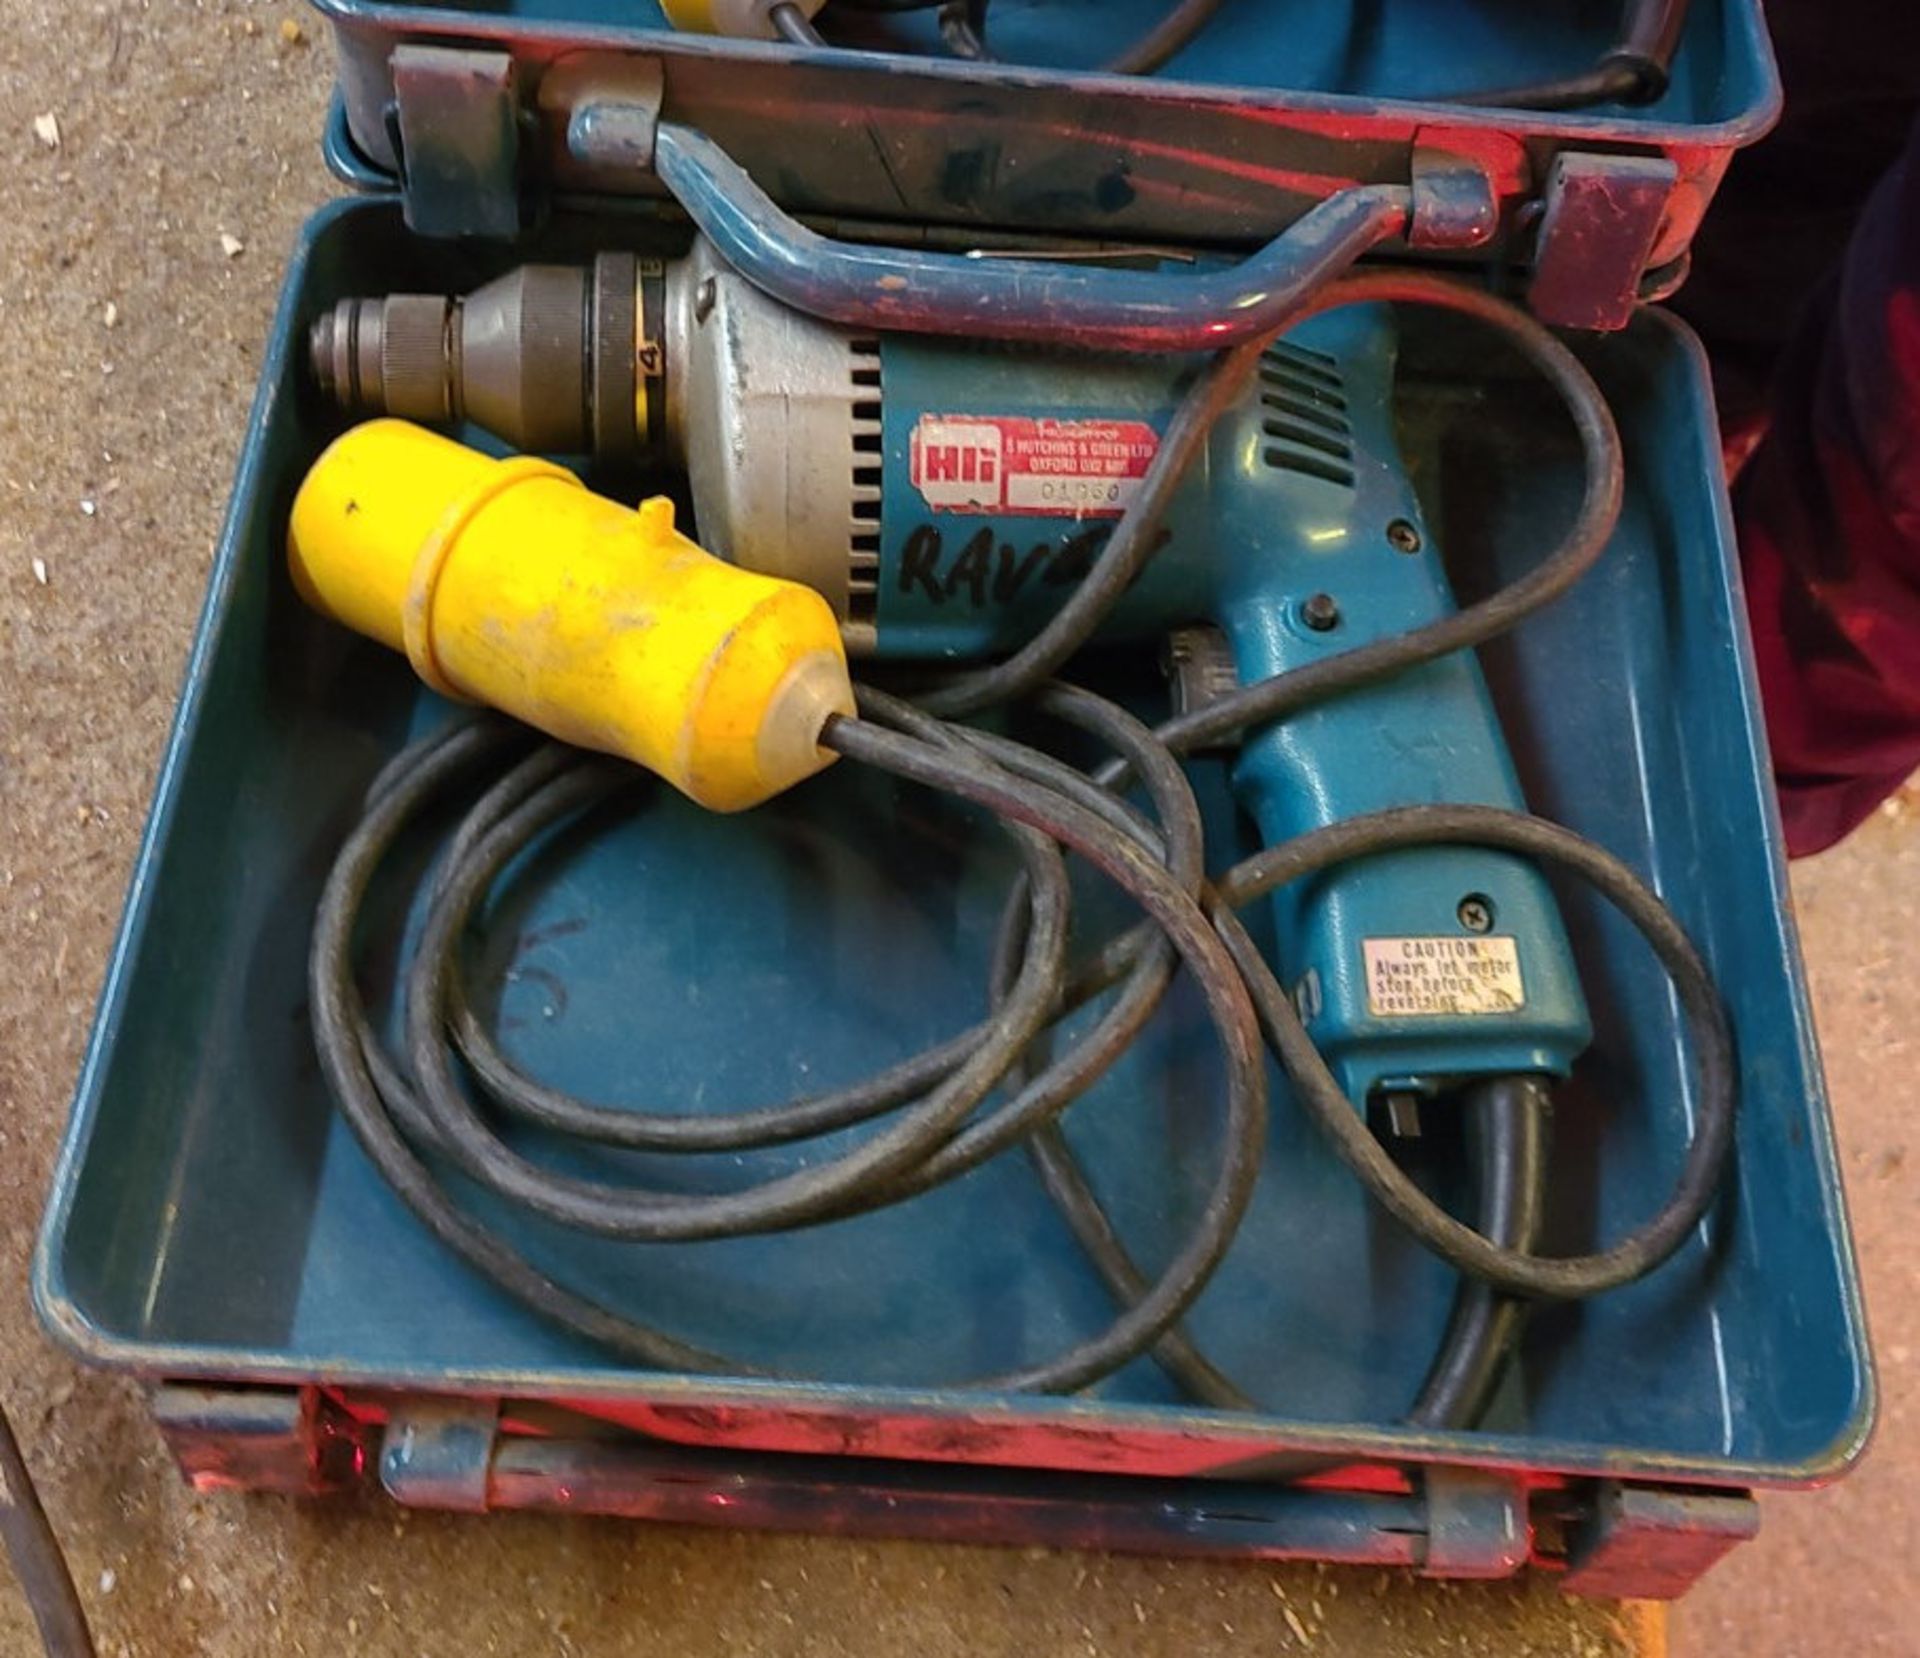 1 x Makita 6805Bv 110V Drill - Ref: - CL846 - Location: Oxford OX2This lot is from a recently closed - Image 4 of 5